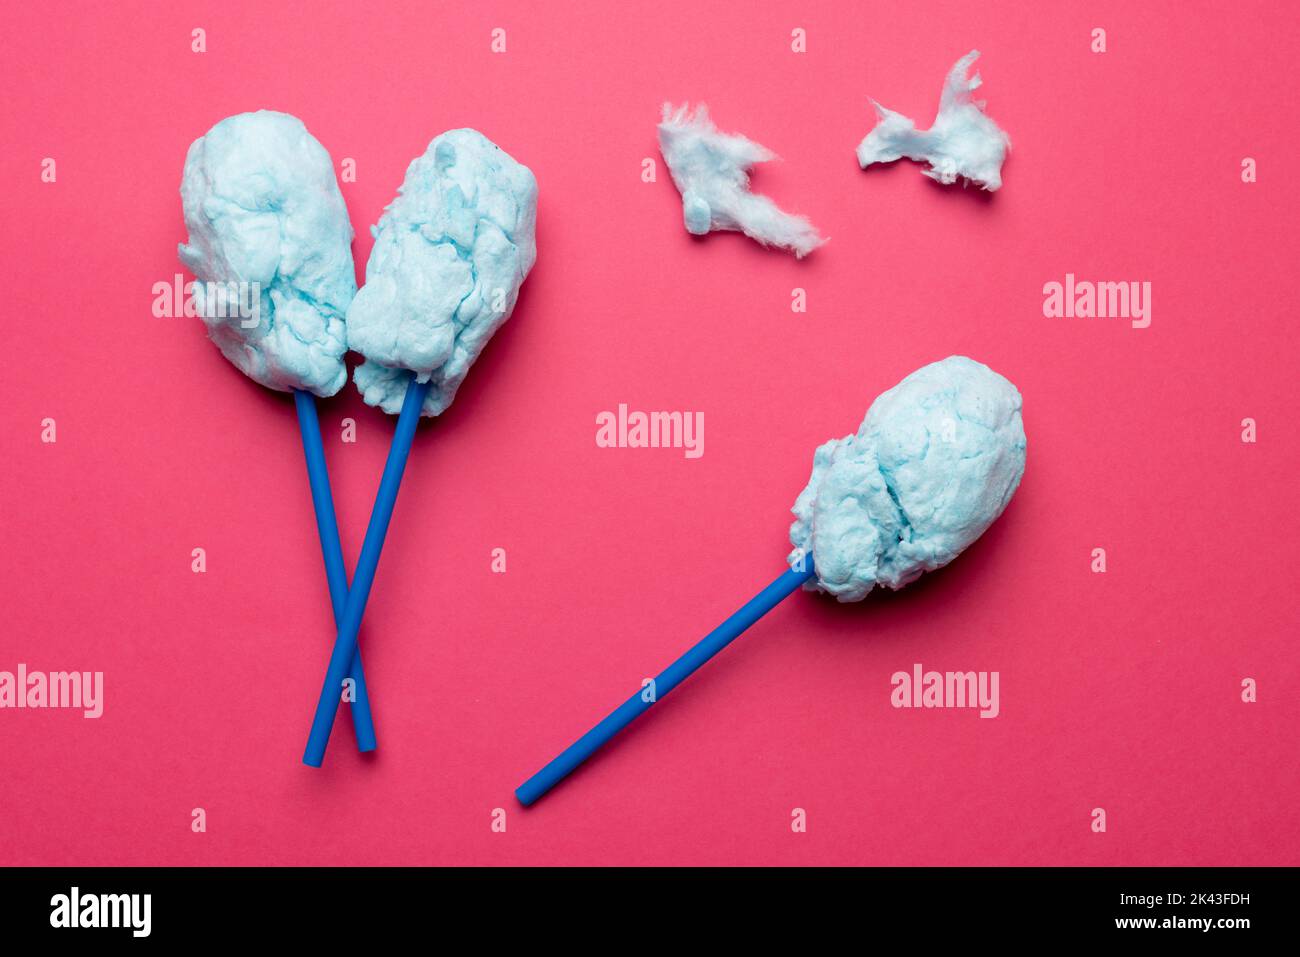 Horizontal image of homemade blue candy floss on three sticks, on pink background Stock Photo